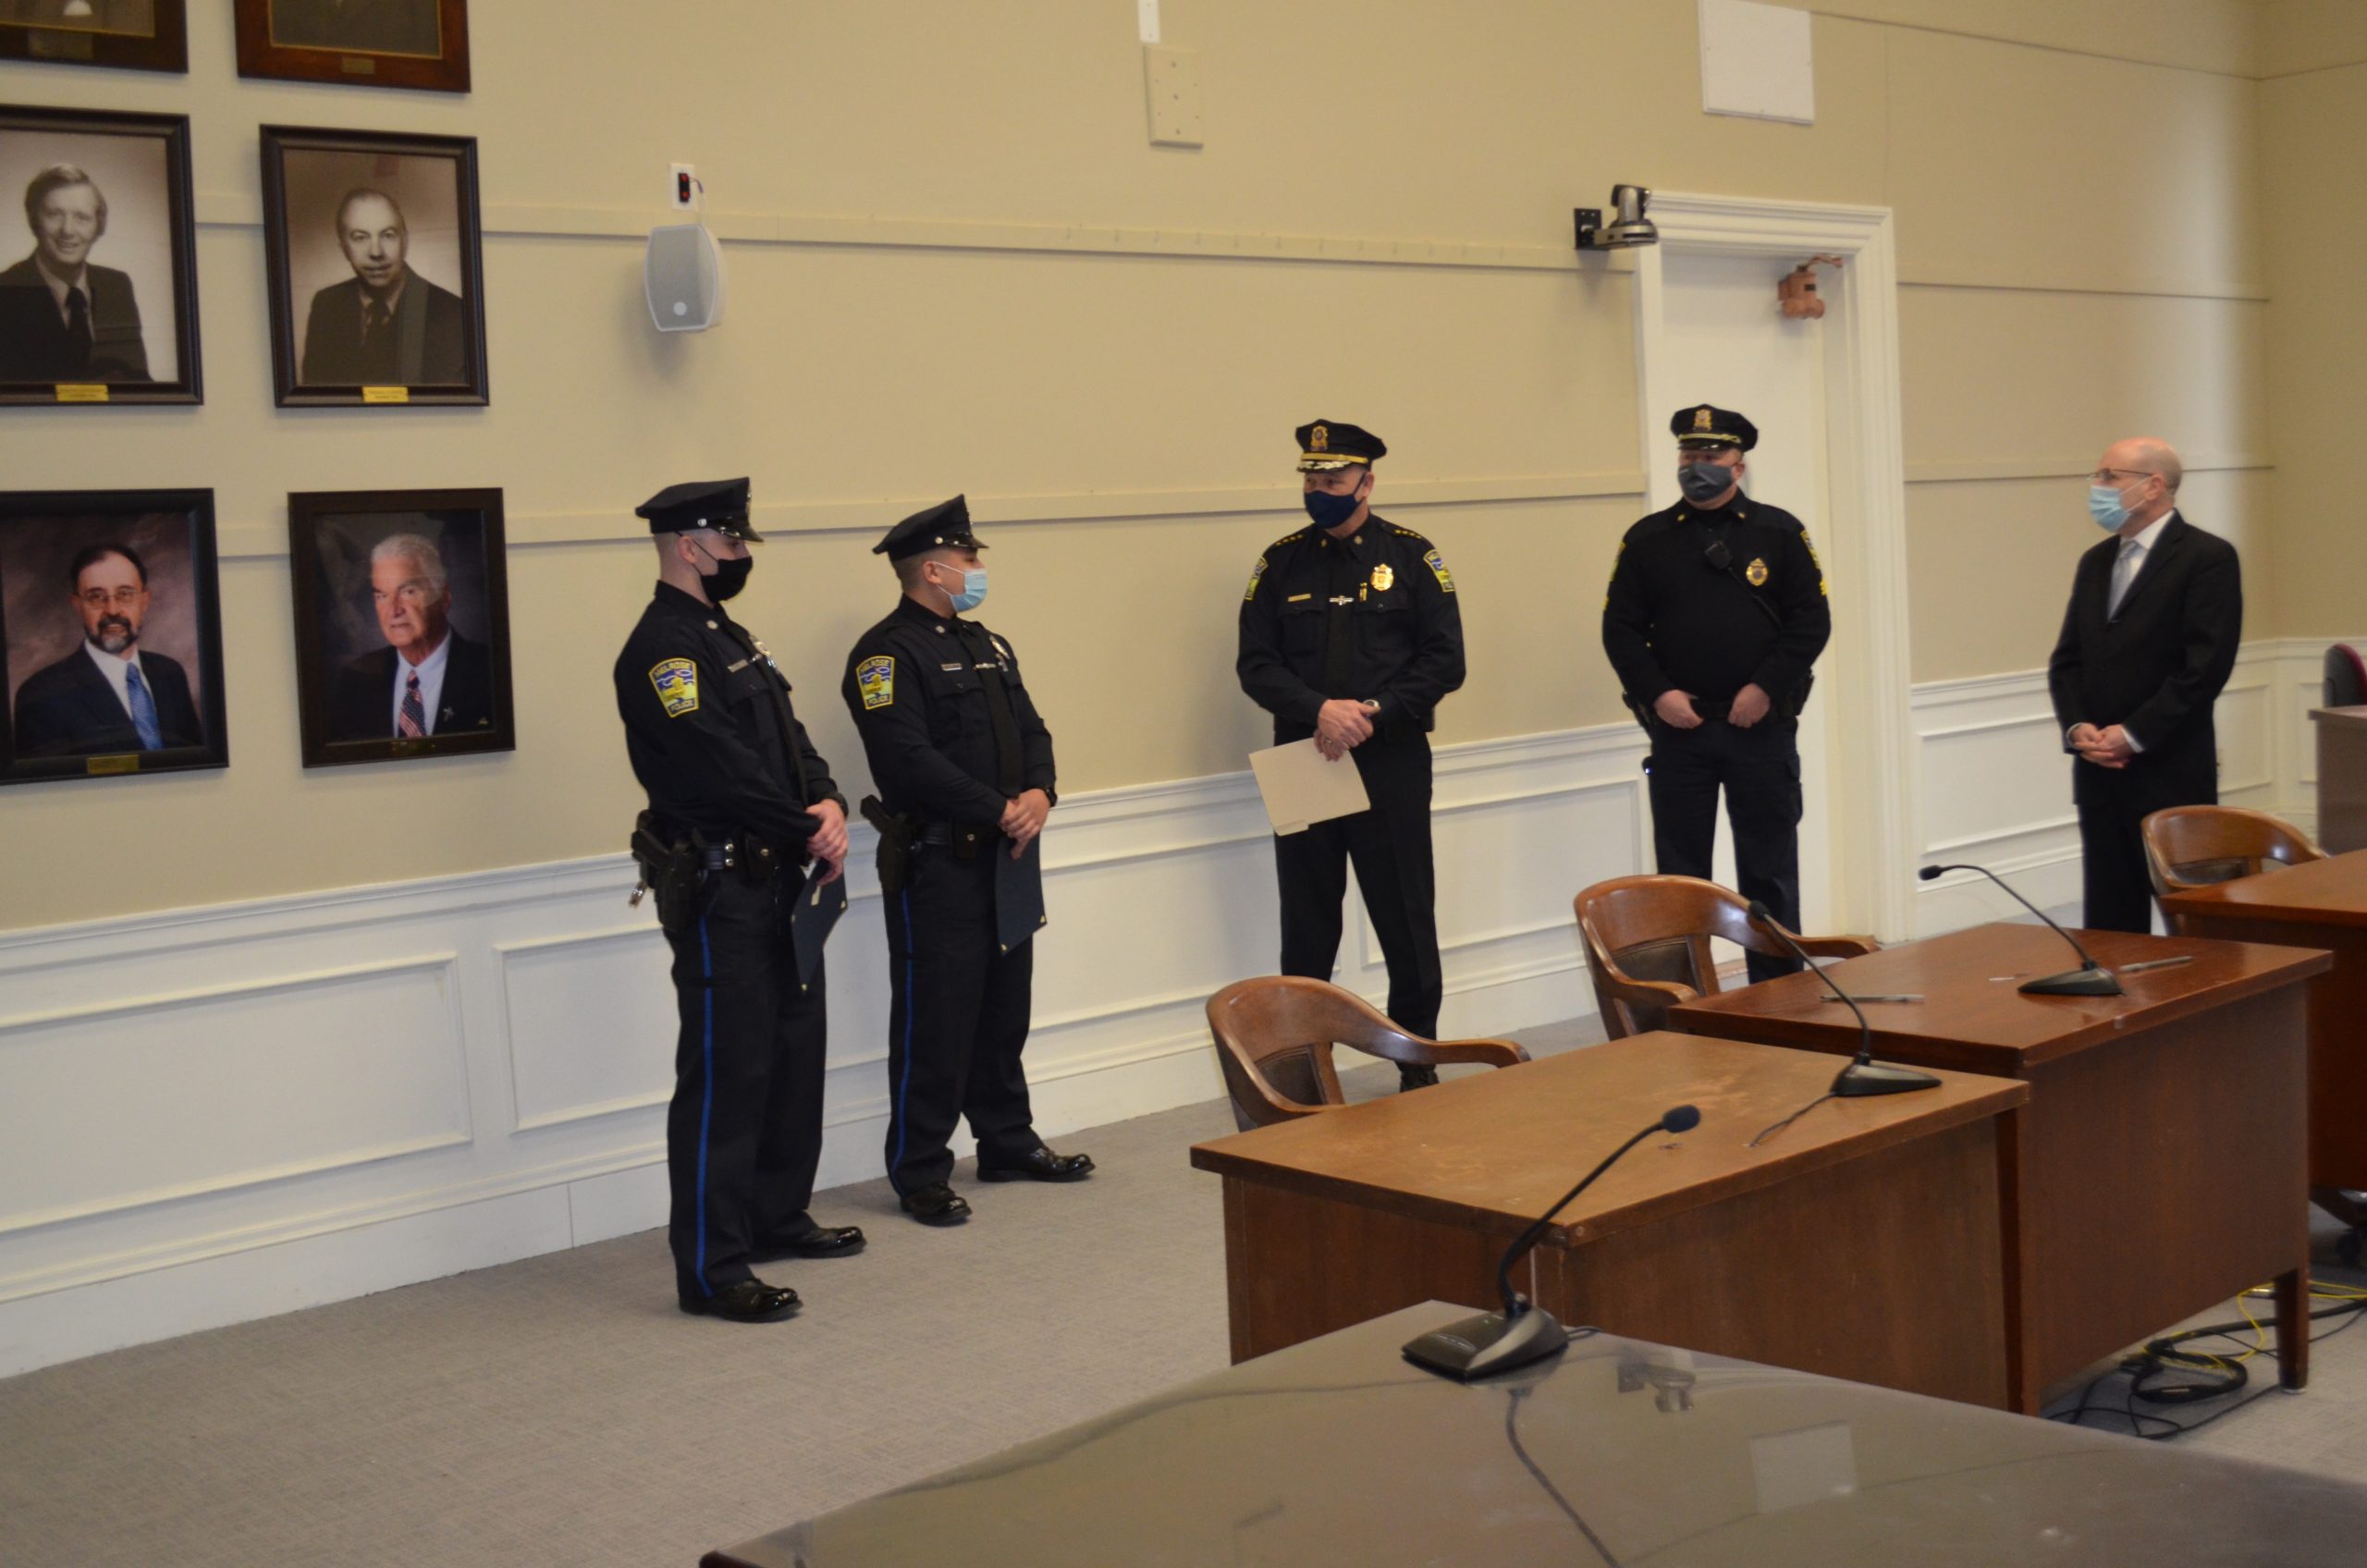 From left: Officer Andrew Ruby, Officer Thomas Grant, Chief Michael L. Lyle, Sgt. Michael Lynch and Mayor Paul Brodeur. (Photo courtesy of the Melrose Police Department)